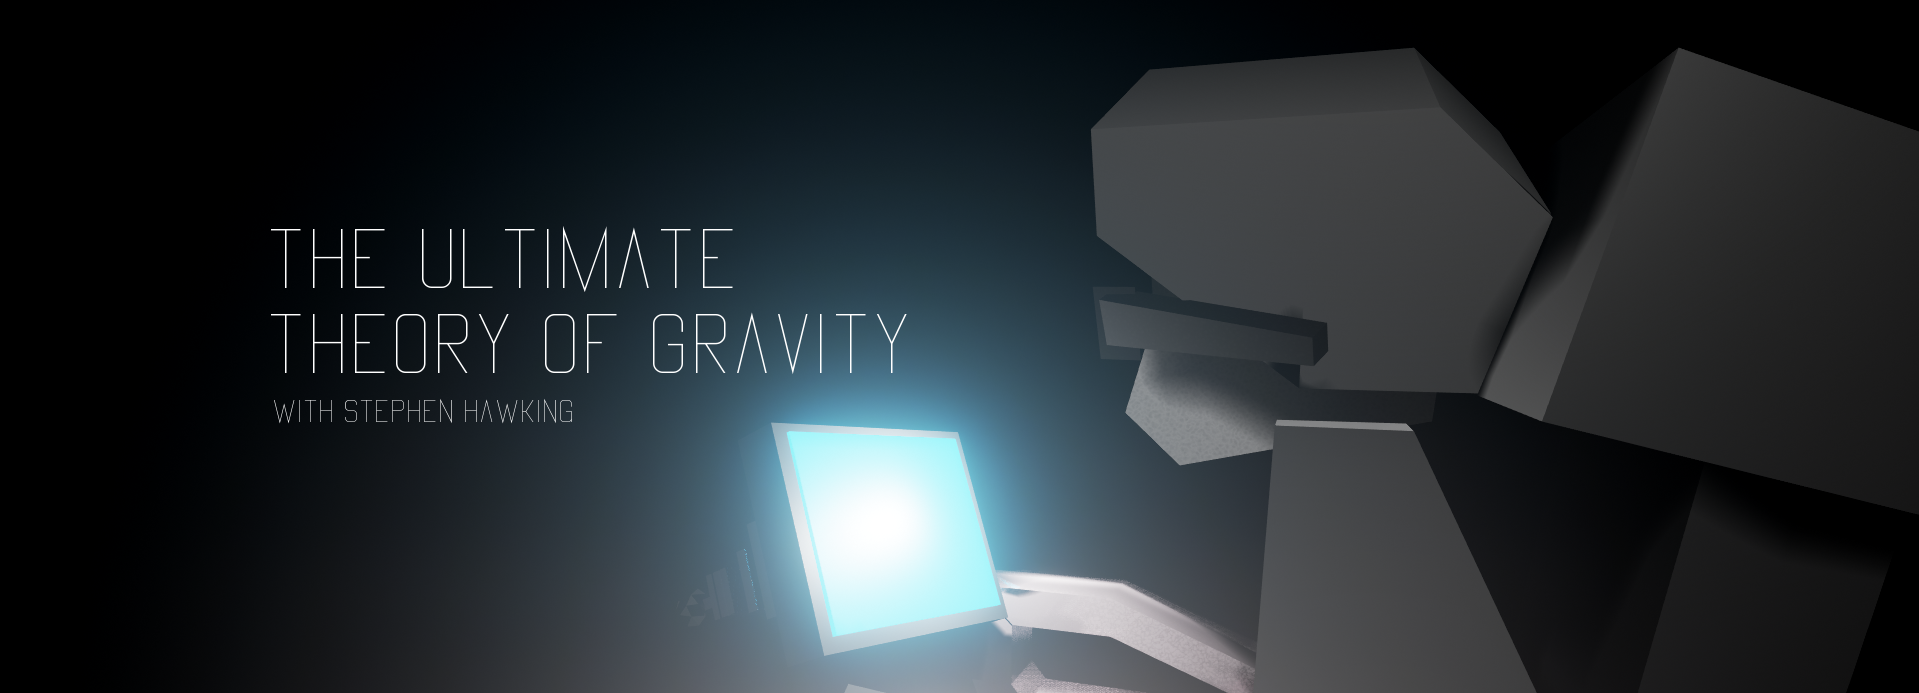 The Ultimate Theory of Gravity